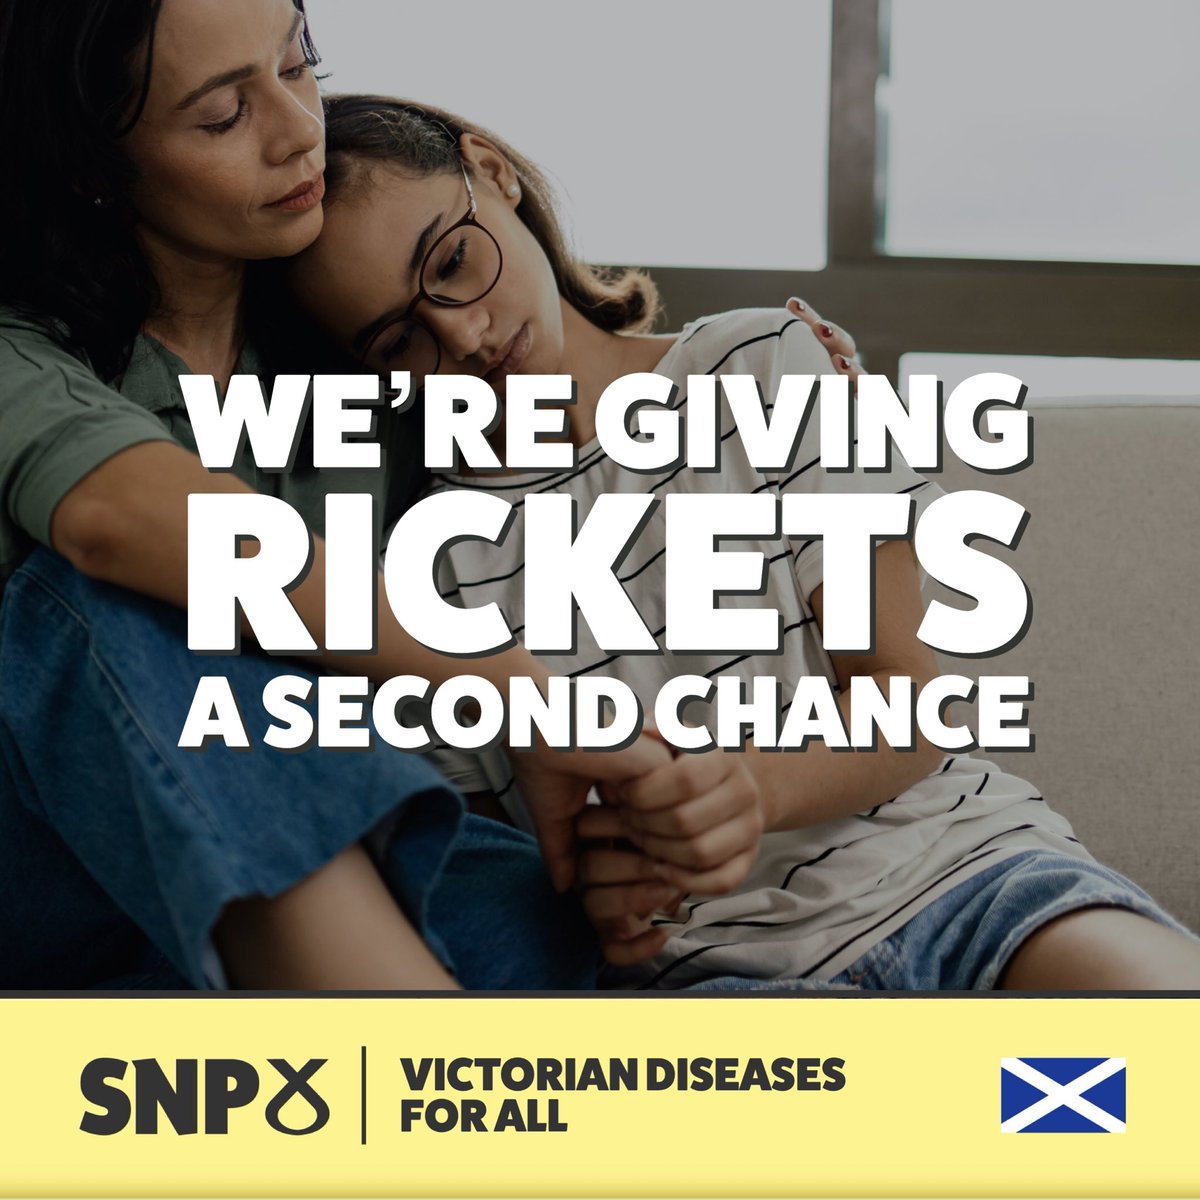 🎉We’re giving rickets a second chance! 📈Under our great leadership, Rickets cases in Scotland are up by 700% compared to Tory-run England. ✅This means your children can now experience the same disease many young Scots used to when living in Victorian slums. Thank us later!